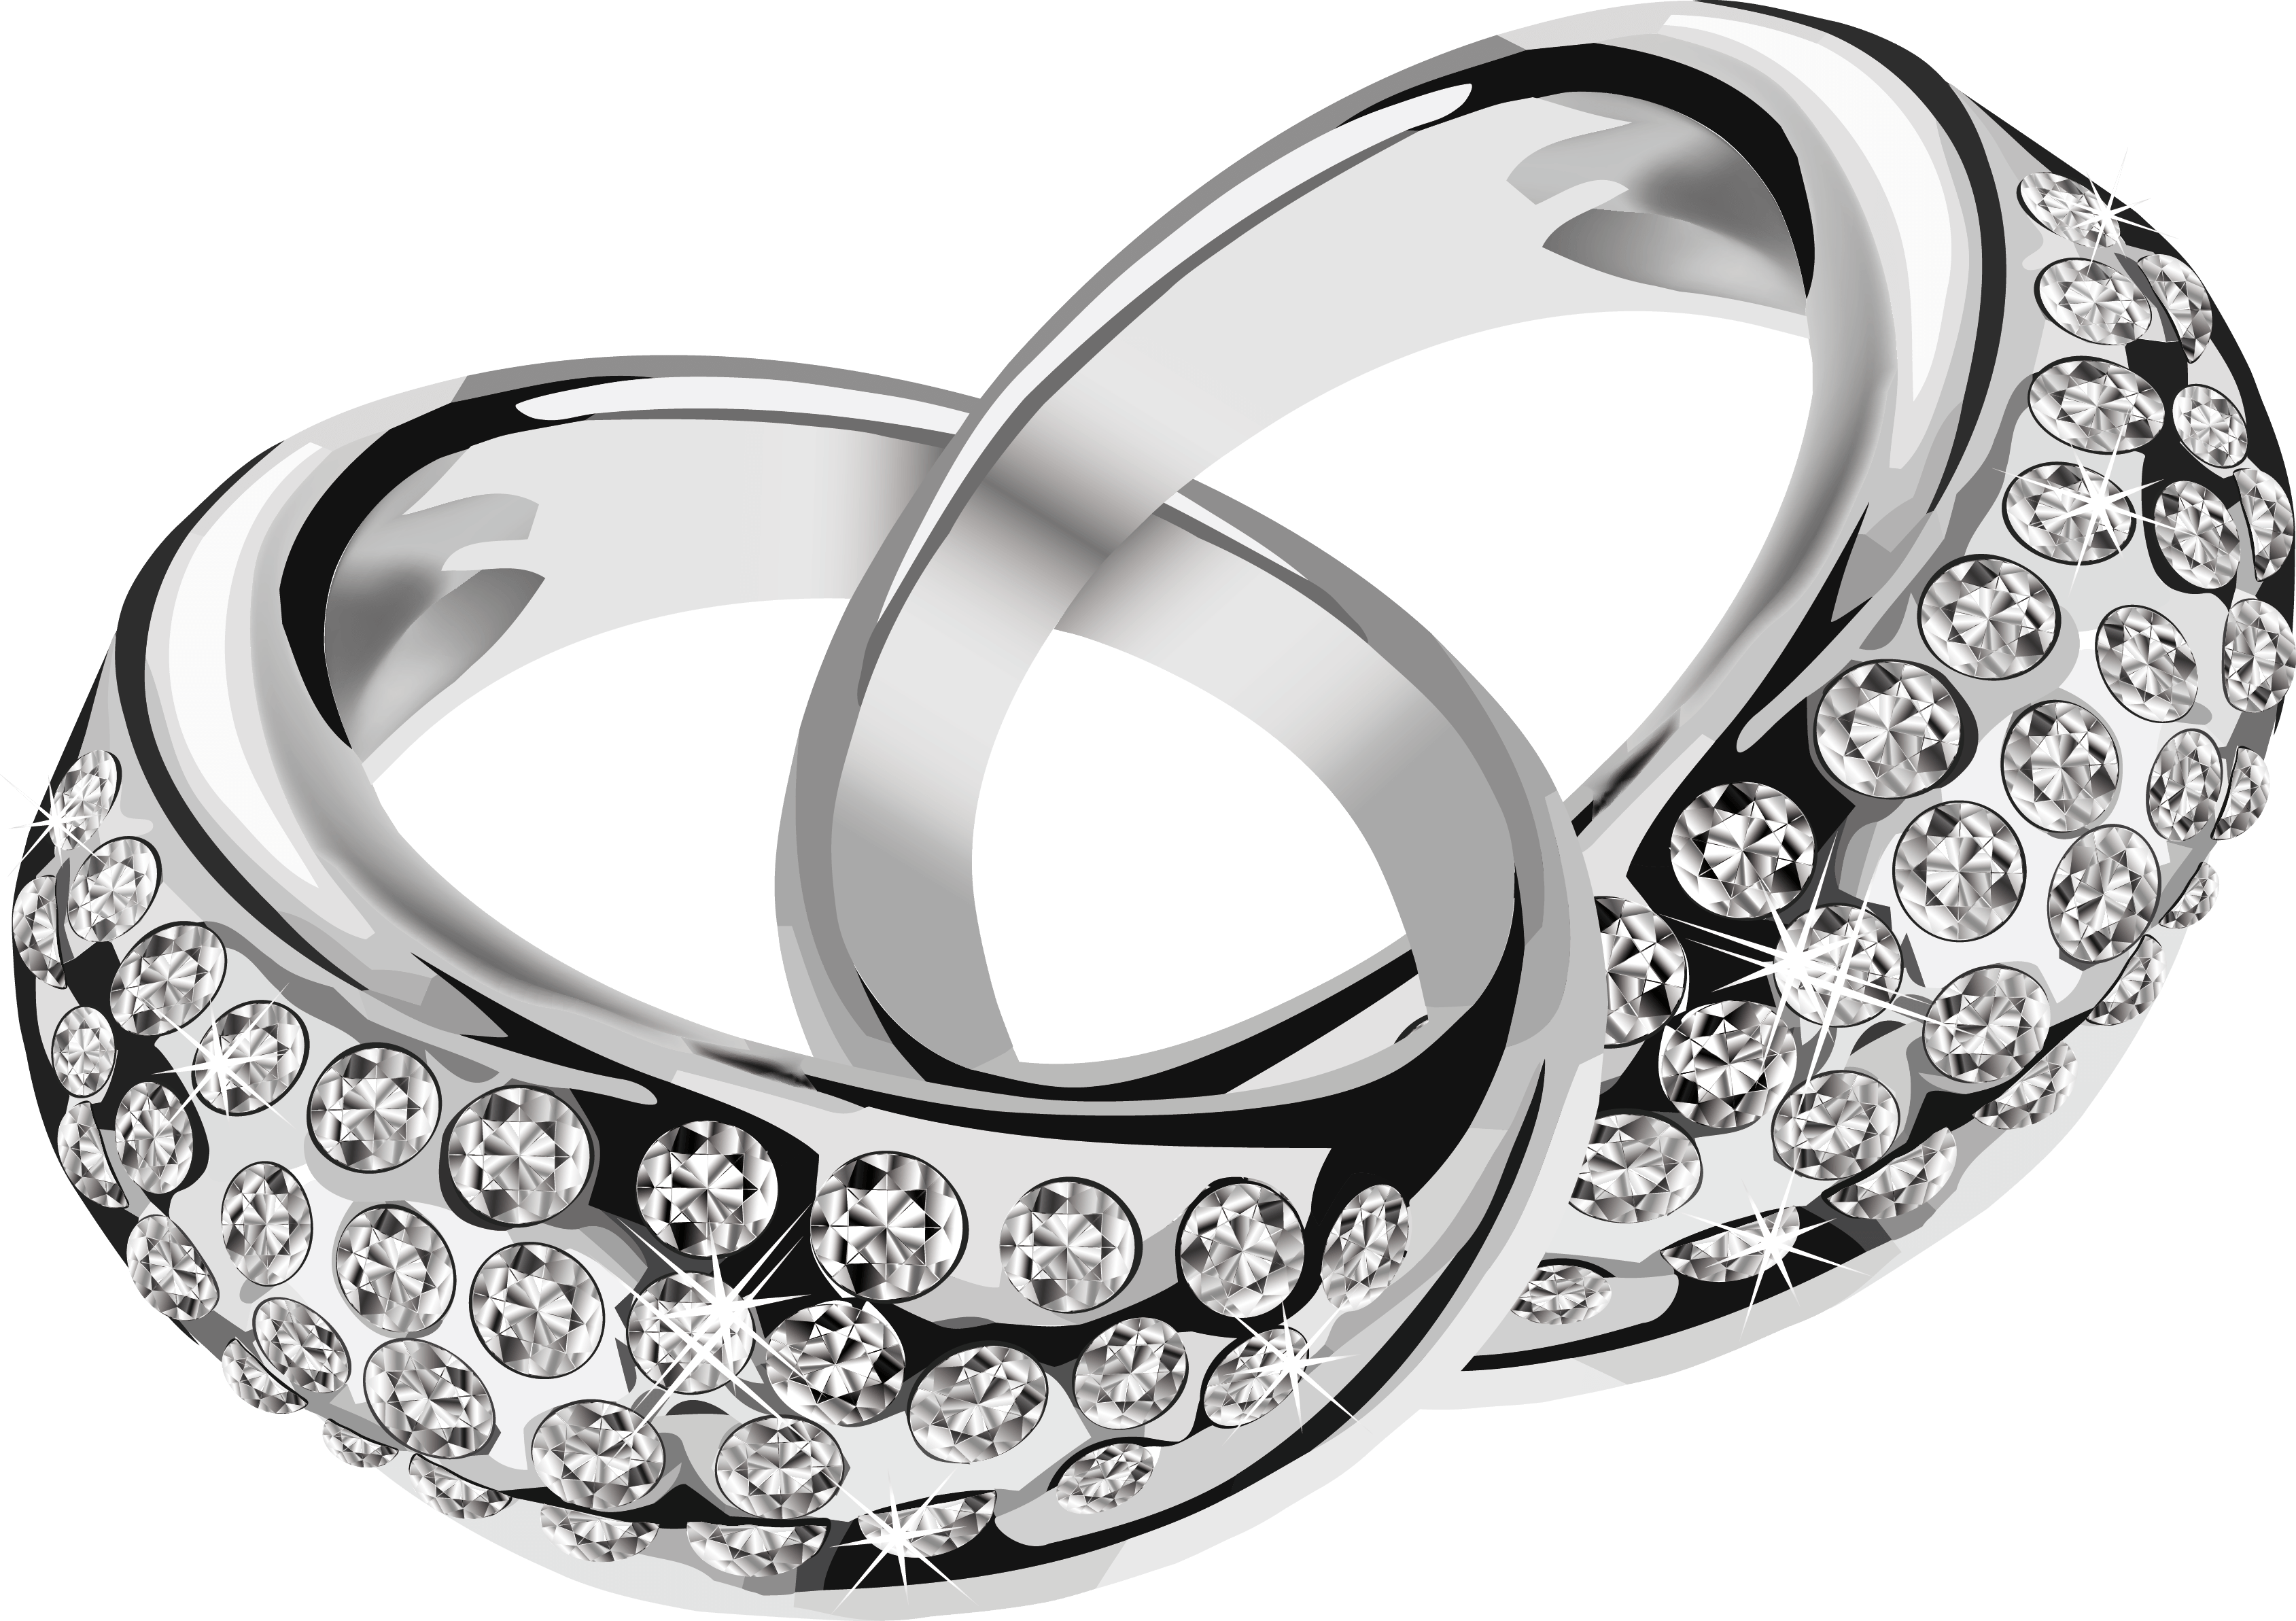 Silver Rings With Diamonds Png PNG Image